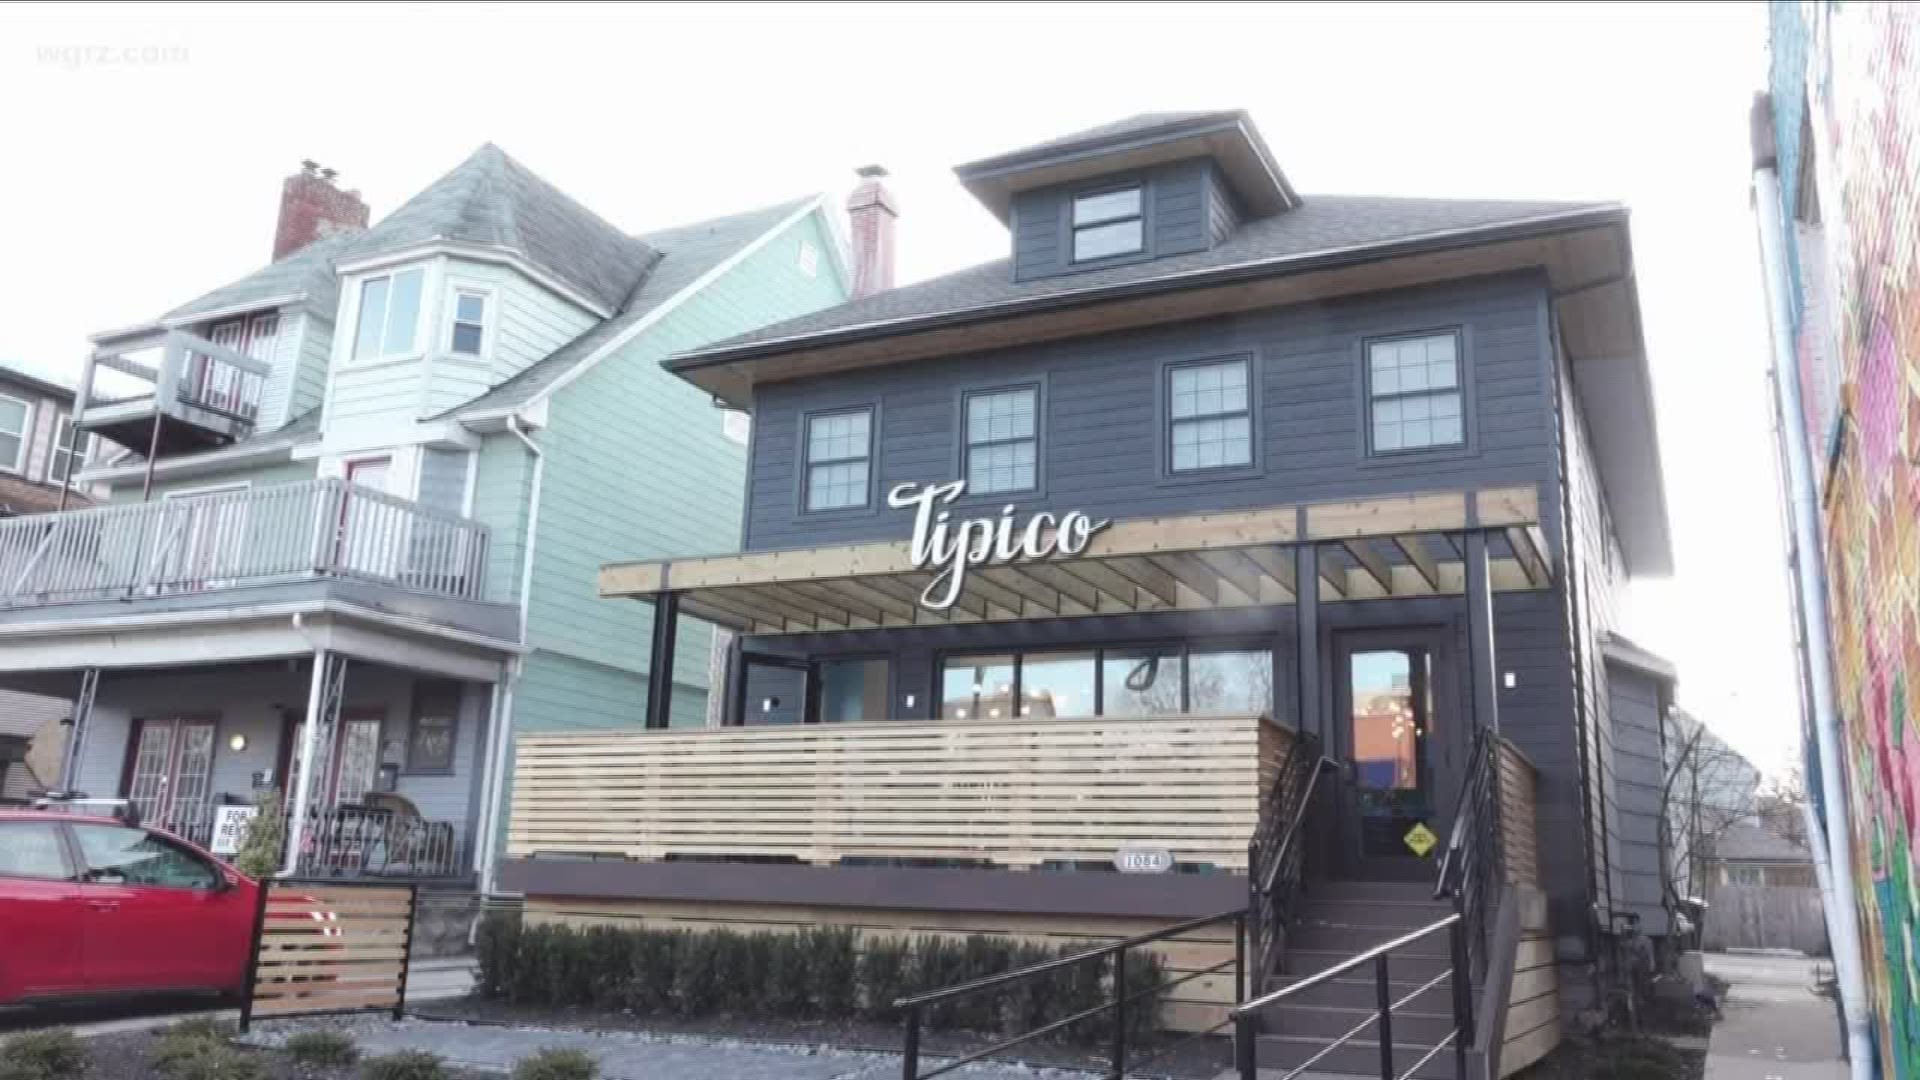 The Elmwood Village welcomed new neighbors tonight, as Tipico Coffee unveiled their newest location.